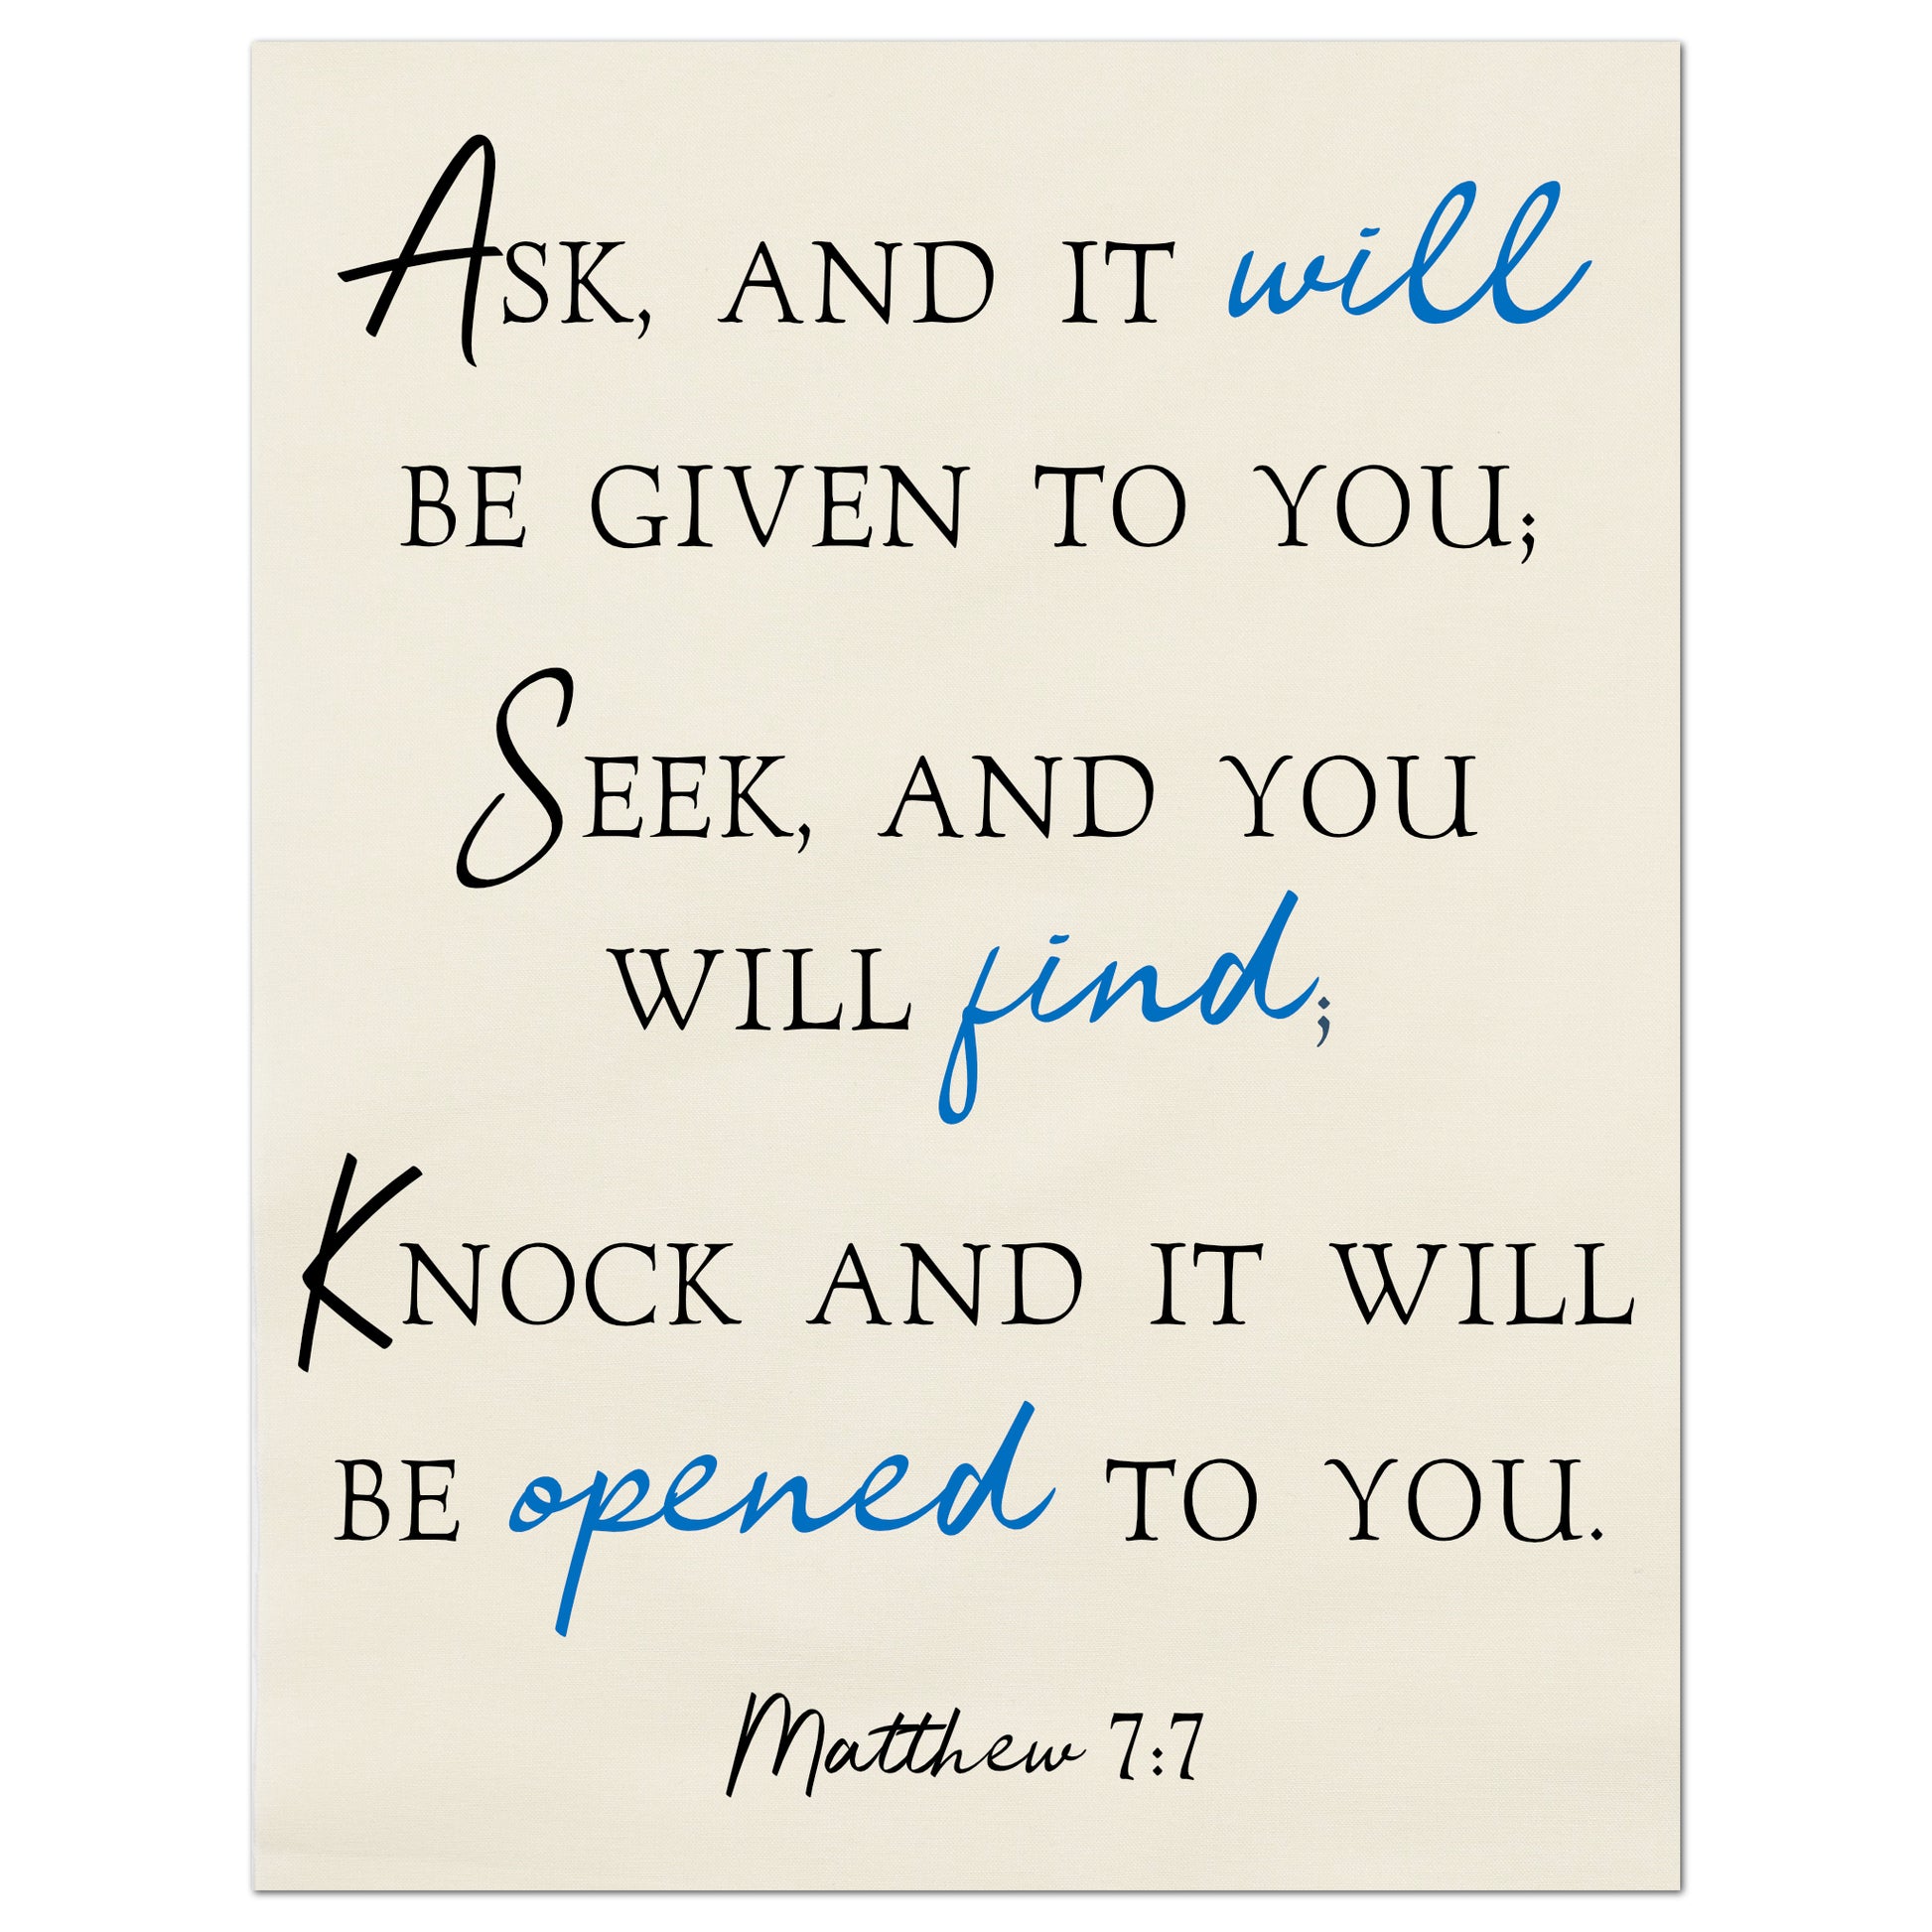 Ask, and it will be given to you; Seek, and you will find; Knock and it will be opened to you.  - Matthew 7 7 - Fabric Panel Print, Wall Hanging, Scripture Fabric, Religious Fabric, Quilt Block